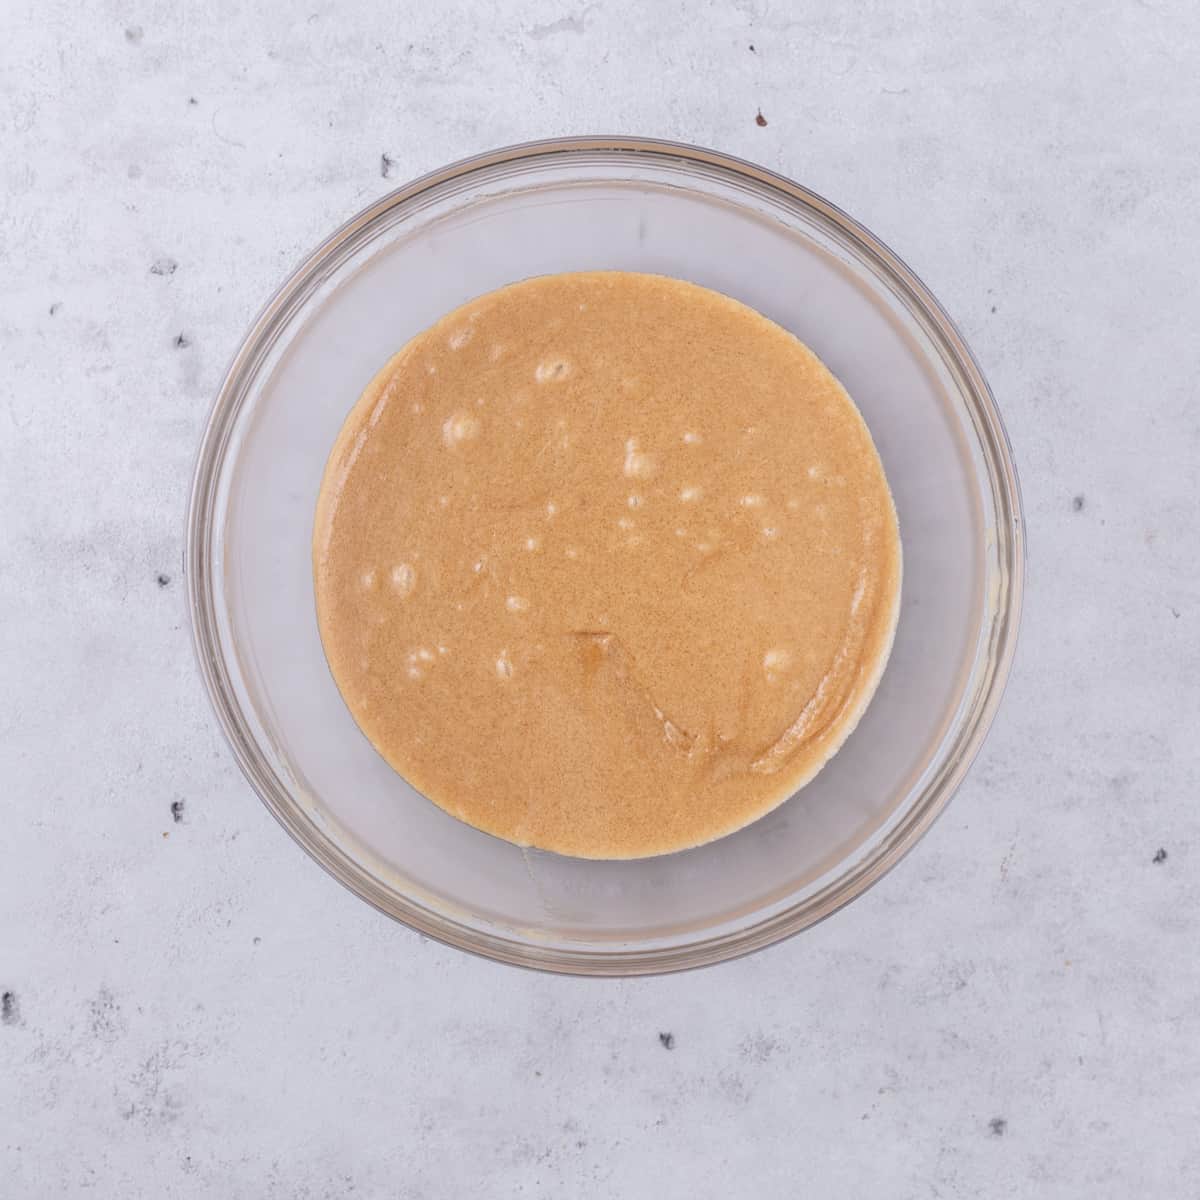 the sugar and wet ingredients combined in a glass bowl on a grey background